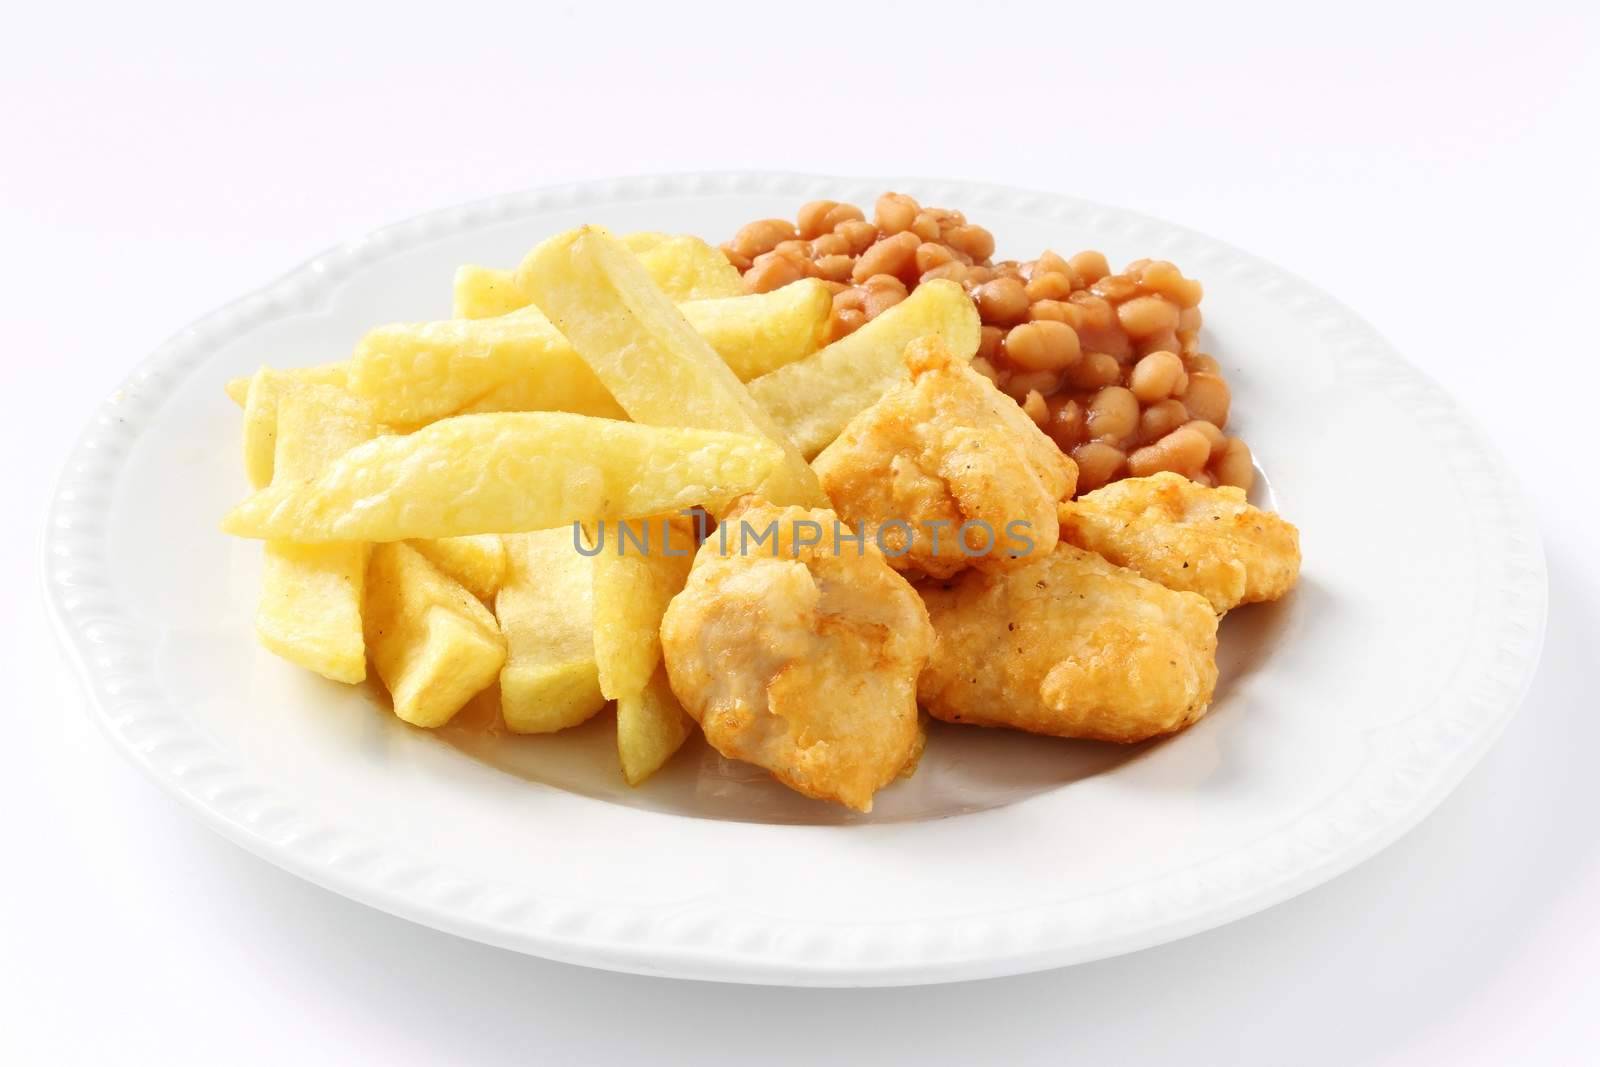 chicken nuggets with chips plated meal